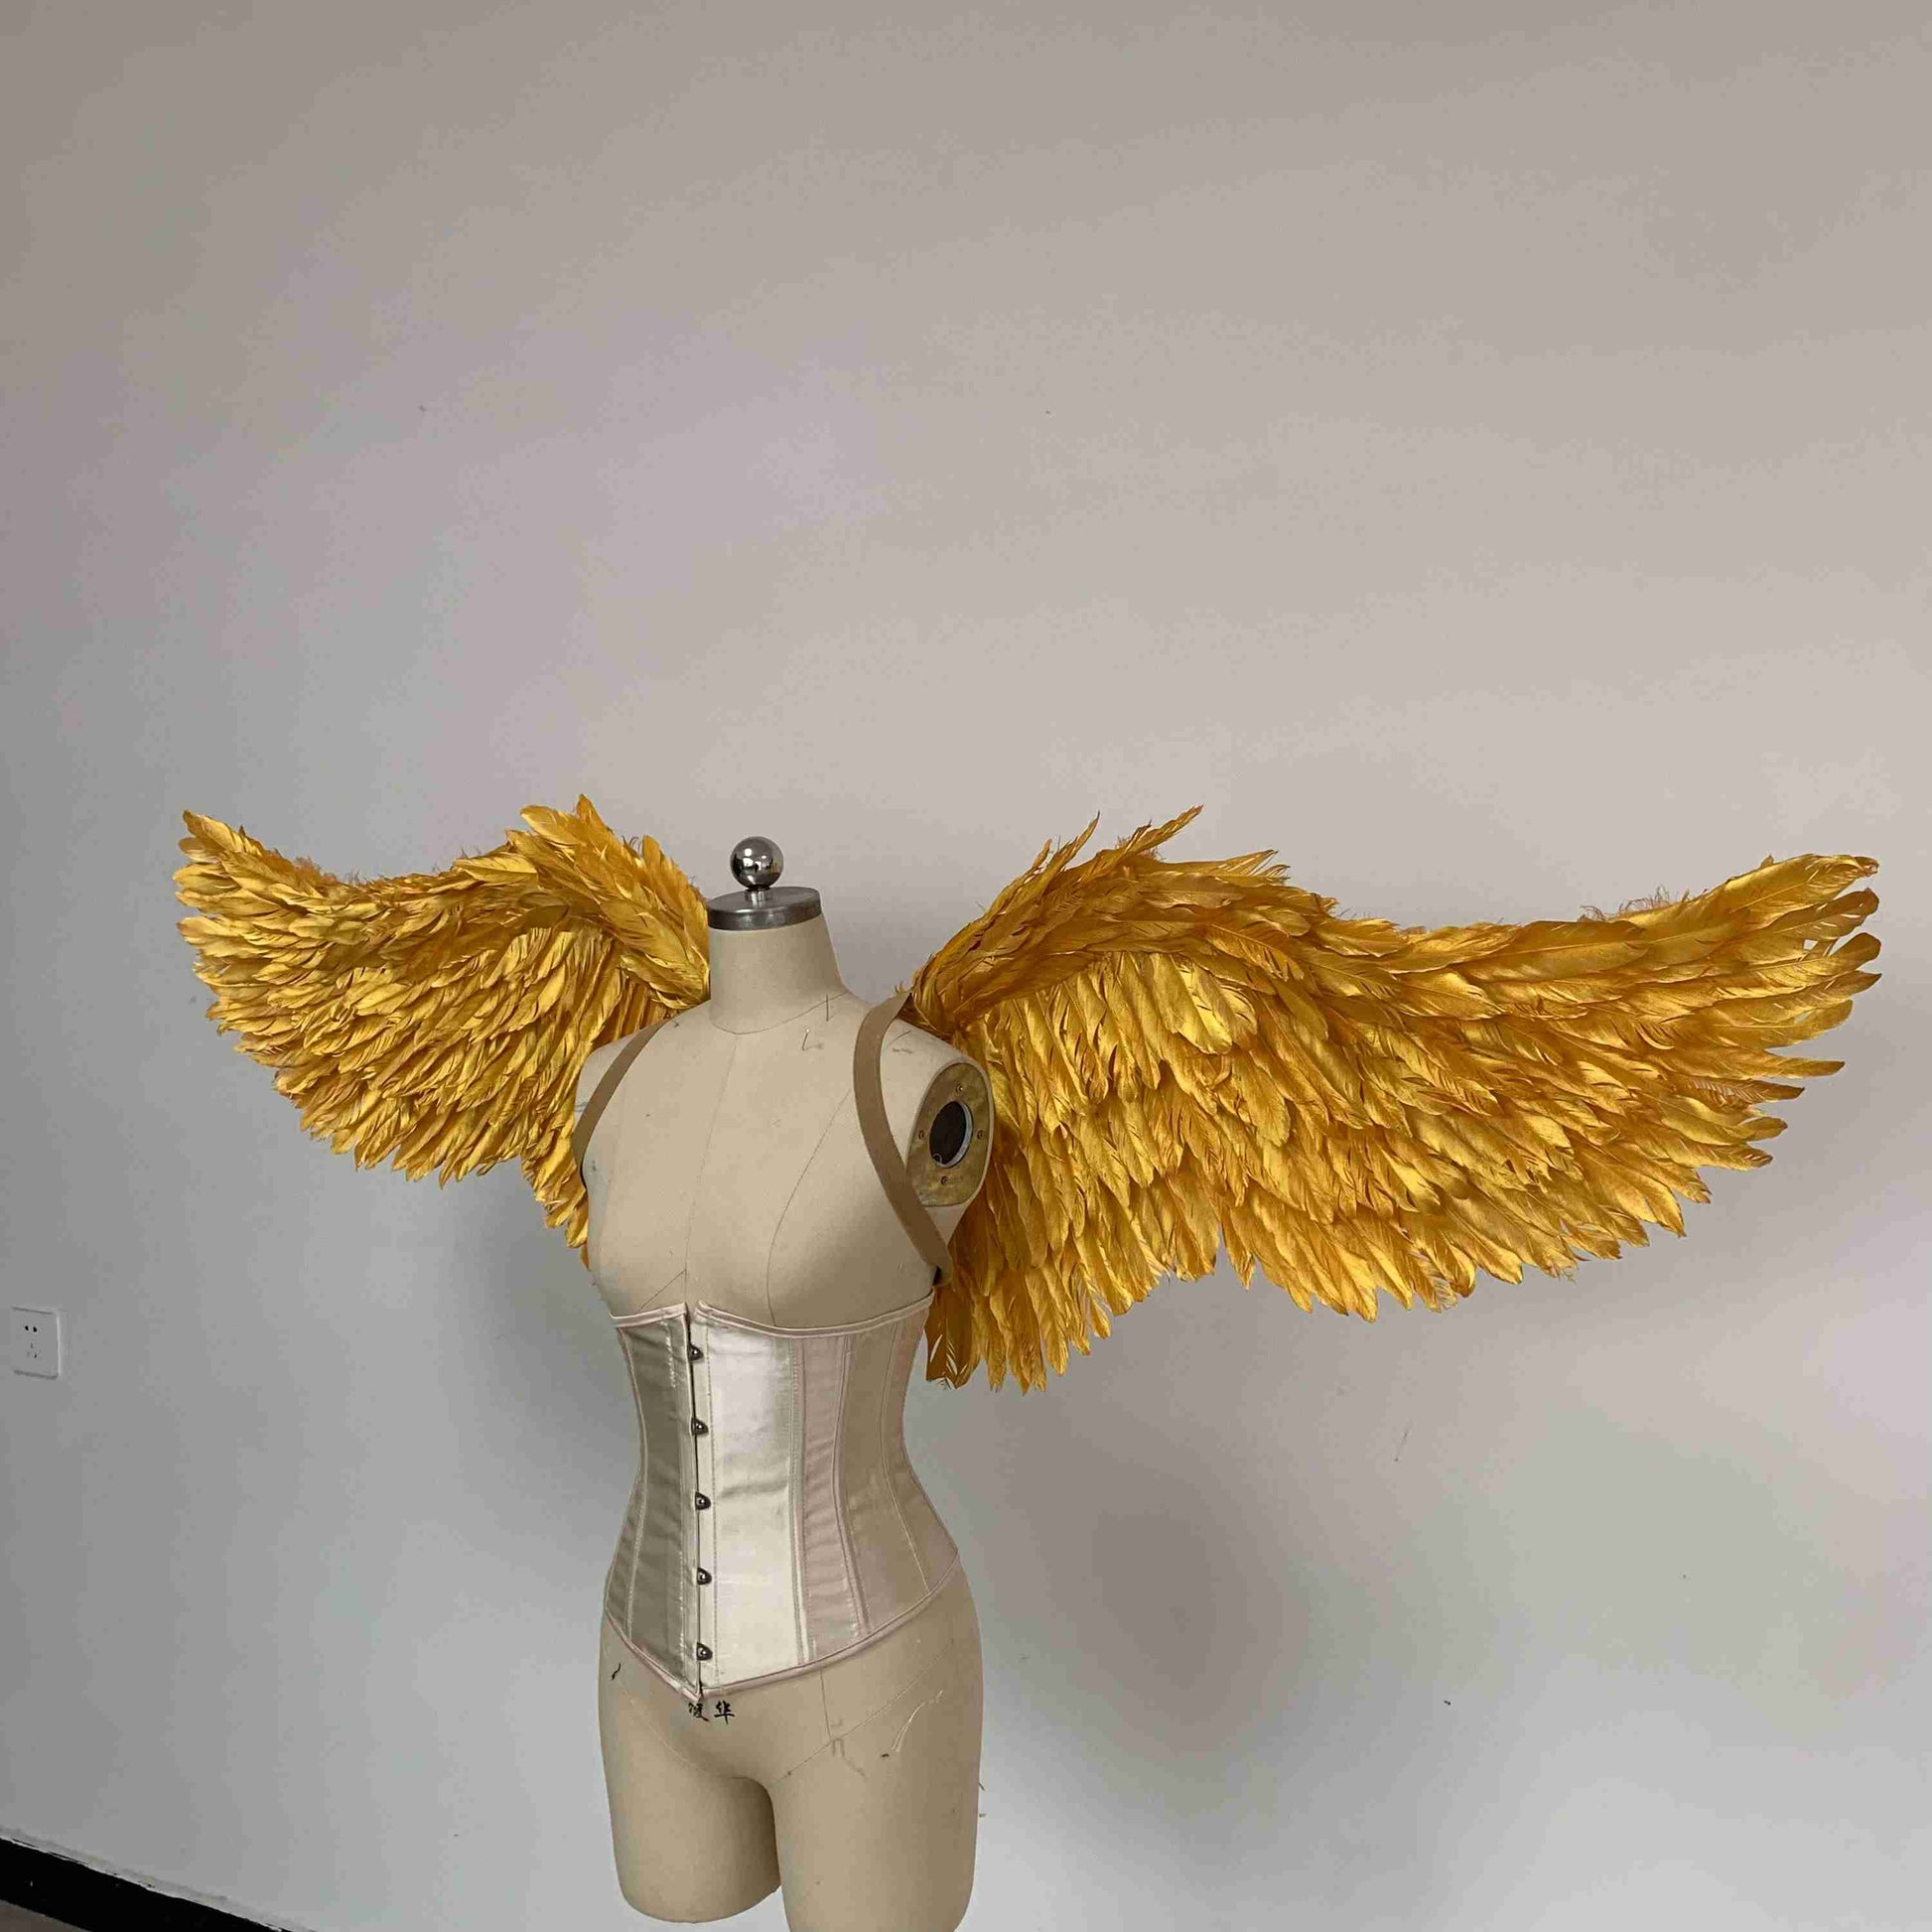 Our small golden angel wings from the left side. Made from goose feathers. Wings for angel costume. Suitable for photoshoots.